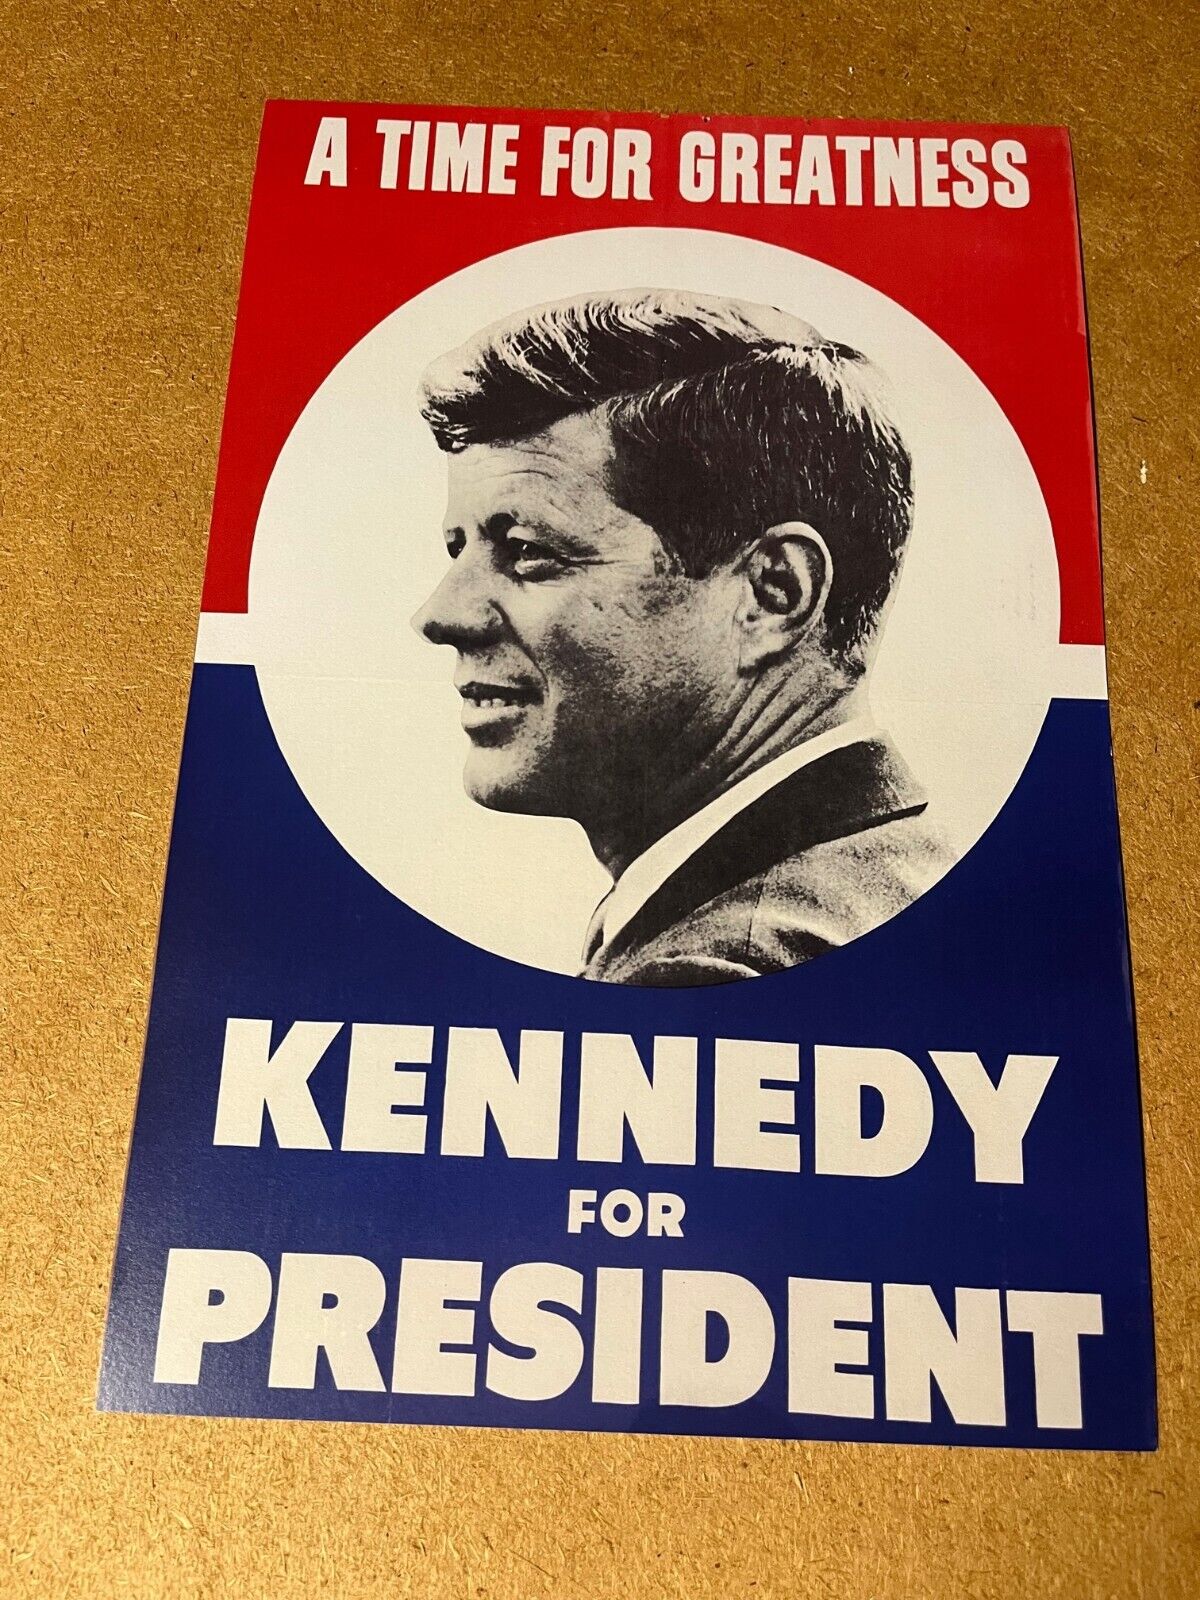 John F. Kennedy JFK for President - A Time for Greatness- Campaign Poster Sign